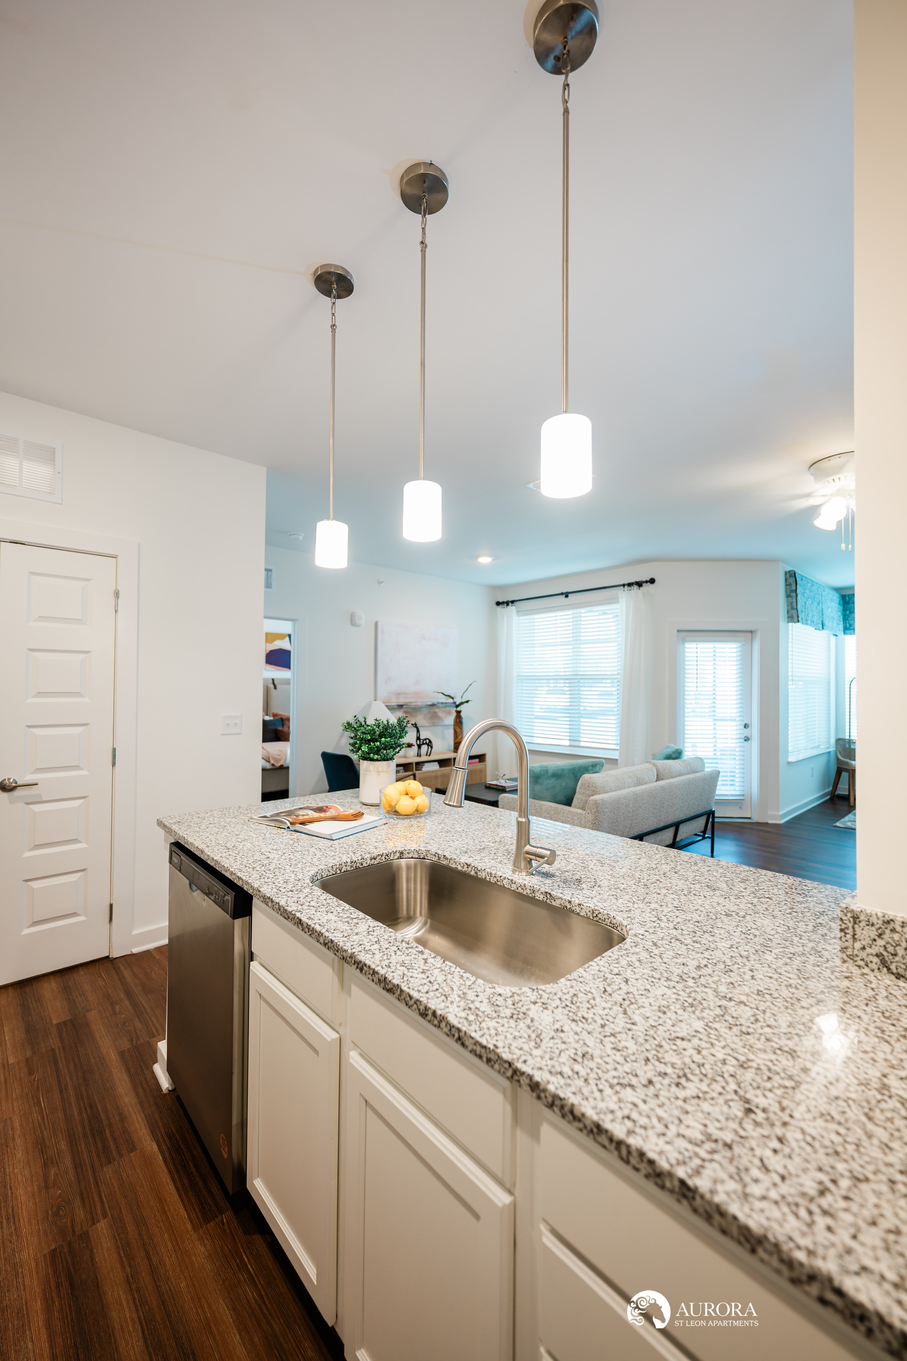 A kitchen with granite counter tops, stainless steel appliances, and 42 Apartment Property Management.